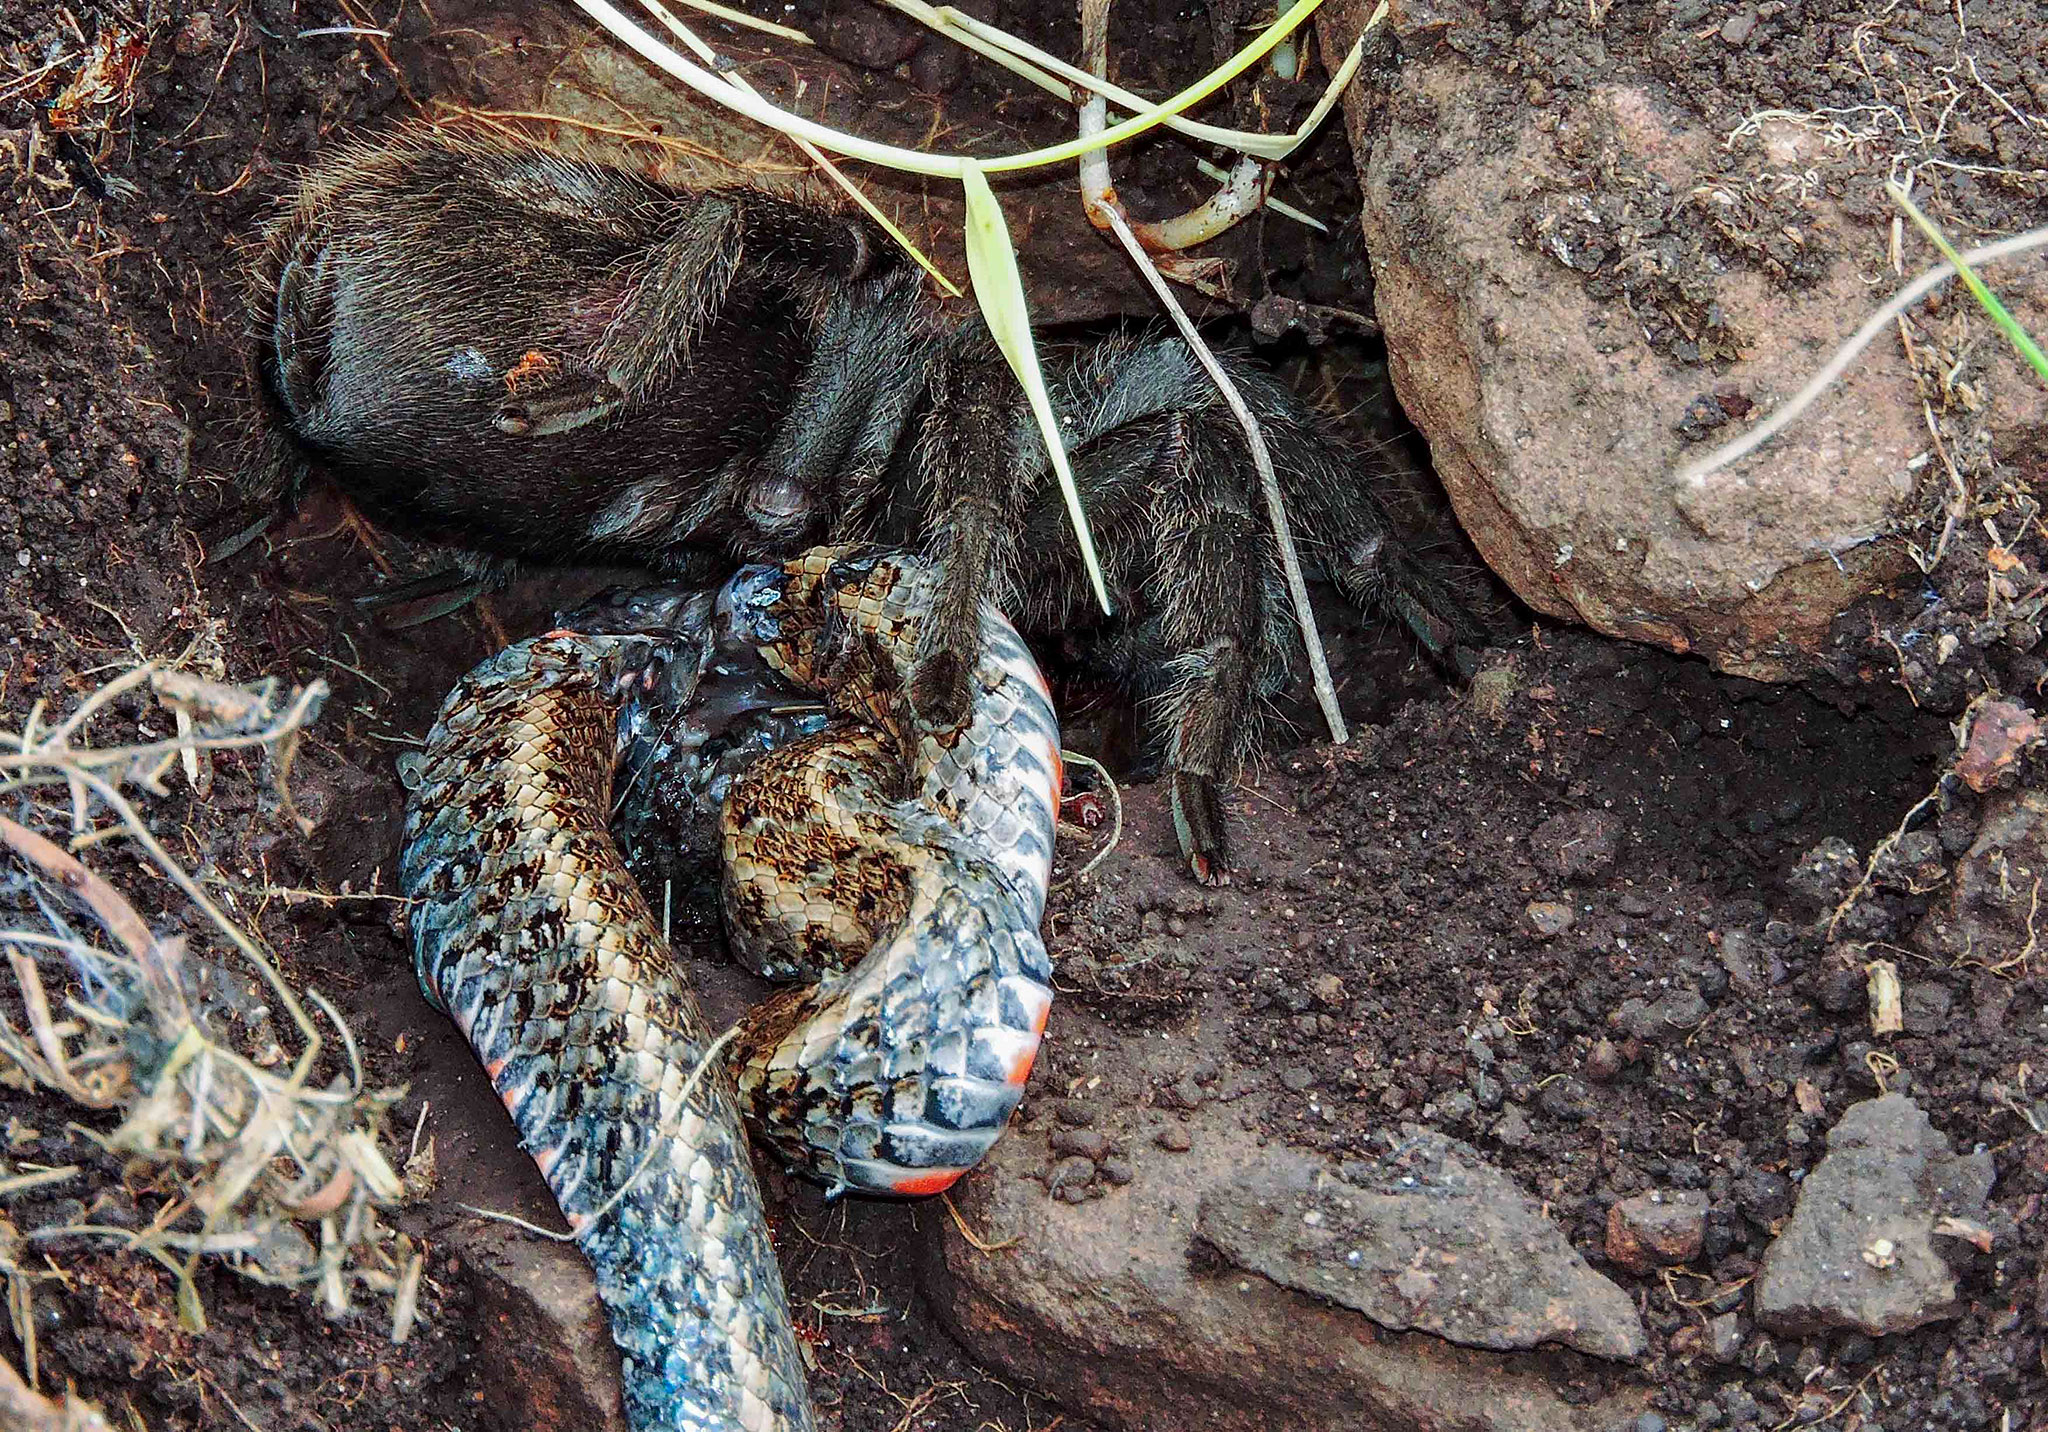 Tarantula Found Eating a Snake in Wild for First Time